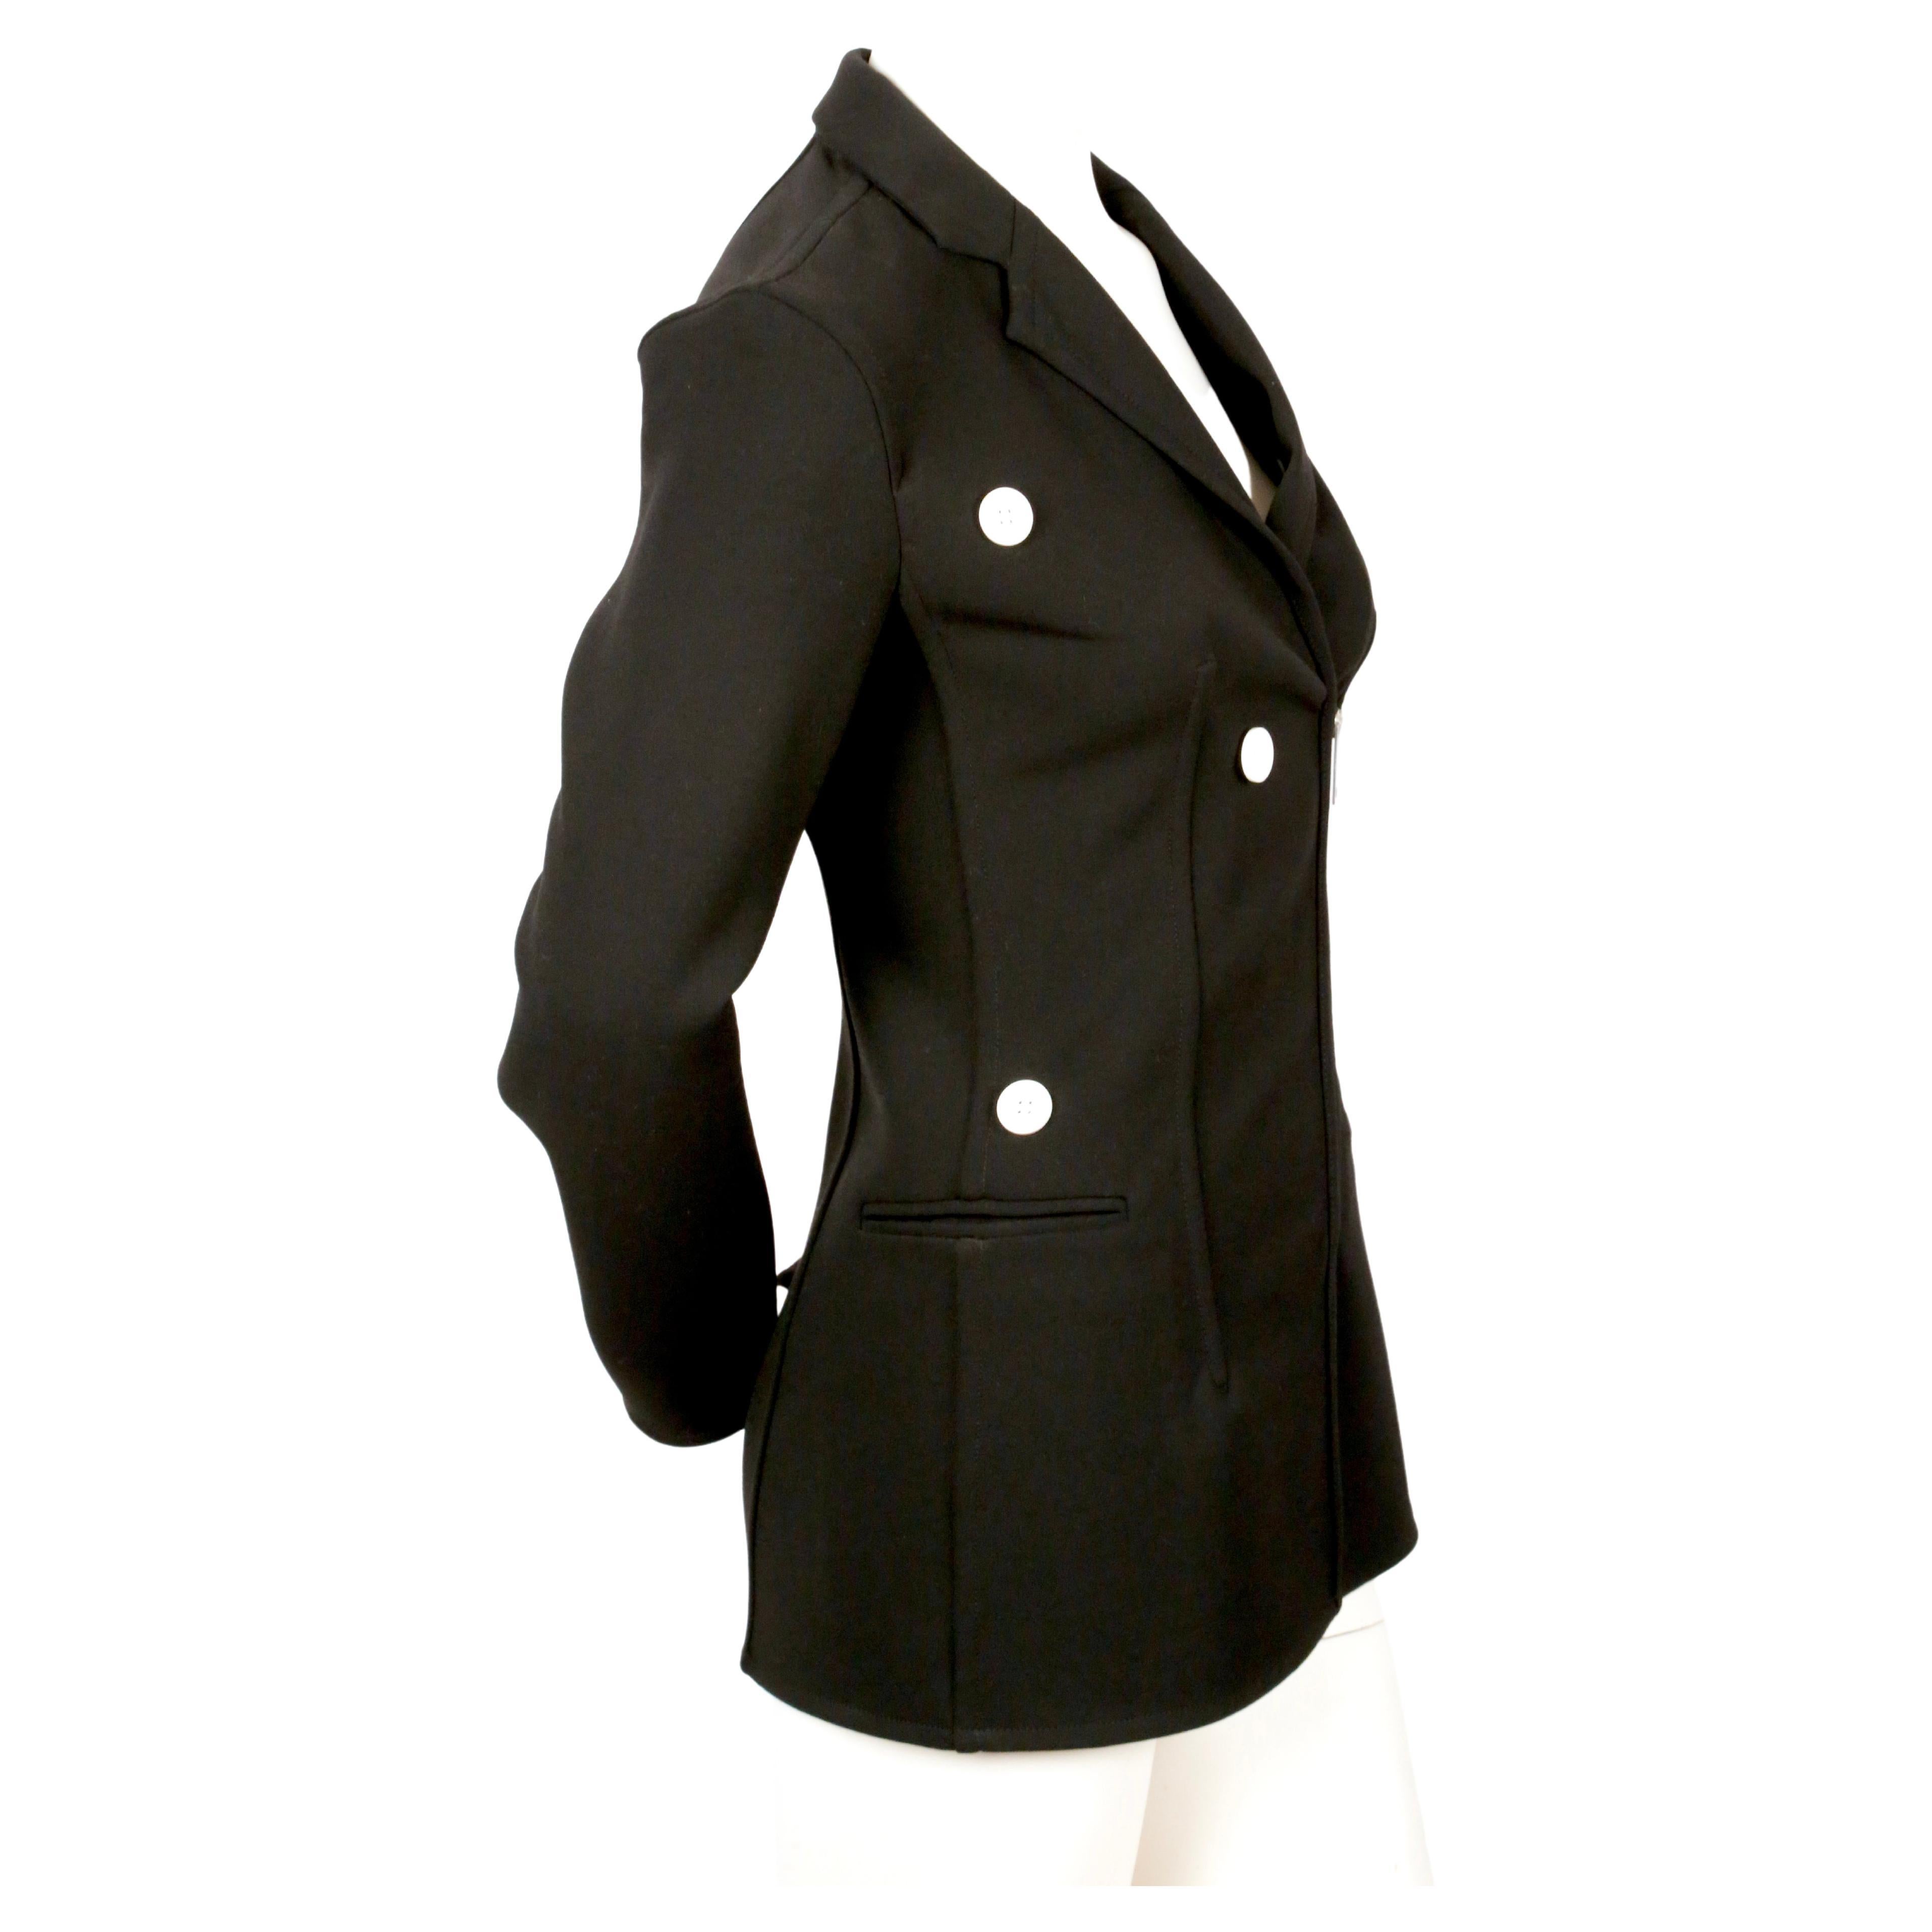 Jet-black, stretch wool jacket with exposed silver zipper and white buttons designed by Phoebe Philo for Celine exactly as seen on the spring 2016 runway. French size 36. Approximate measurements (unstretched): shoulder 16